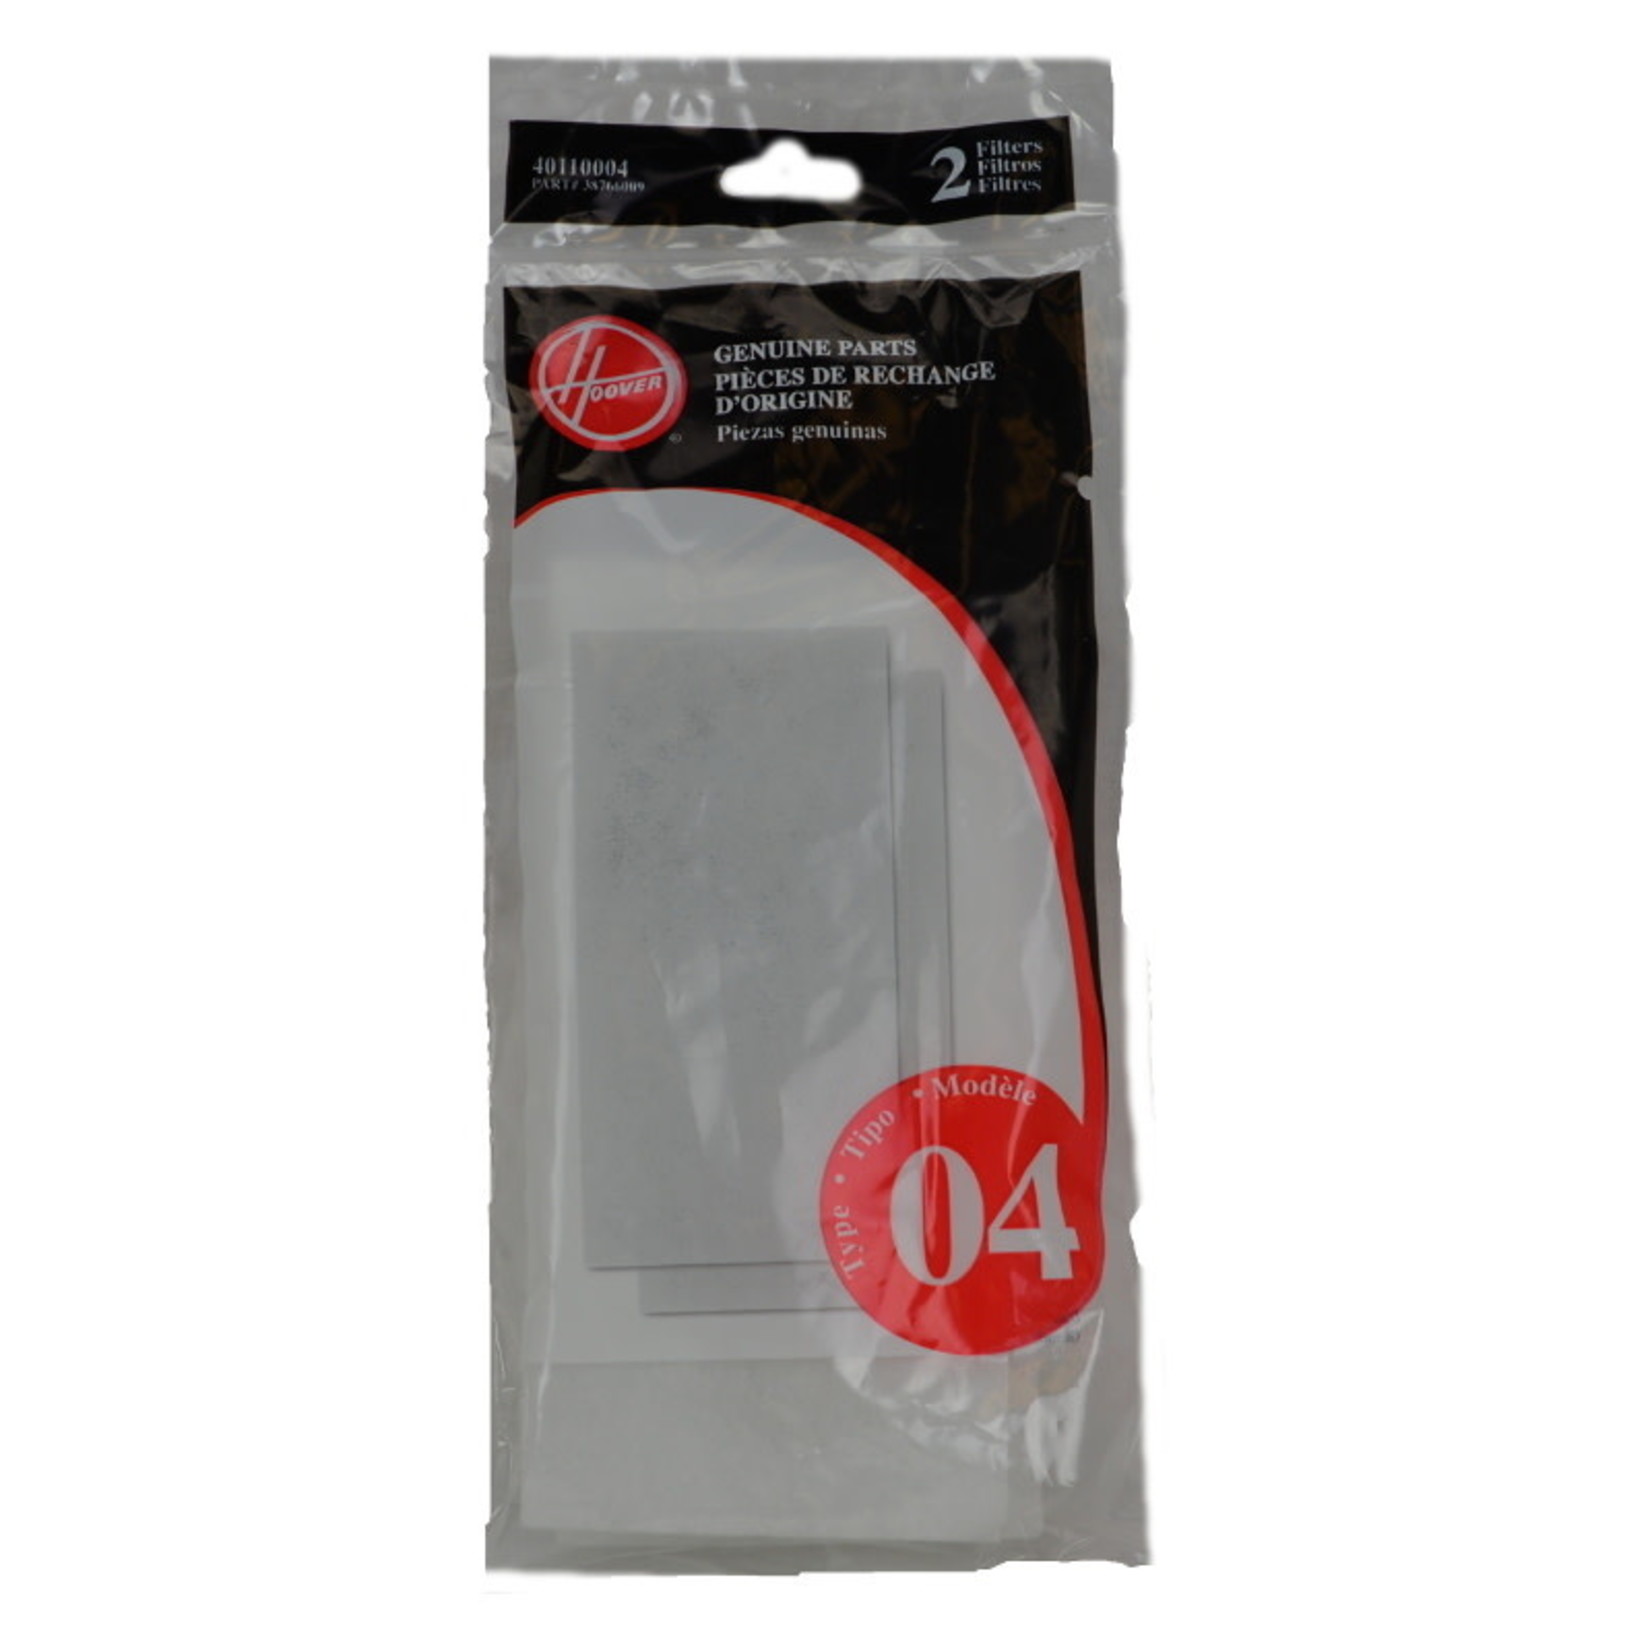 Hoover Hoover Style "04" Filter (2pk)